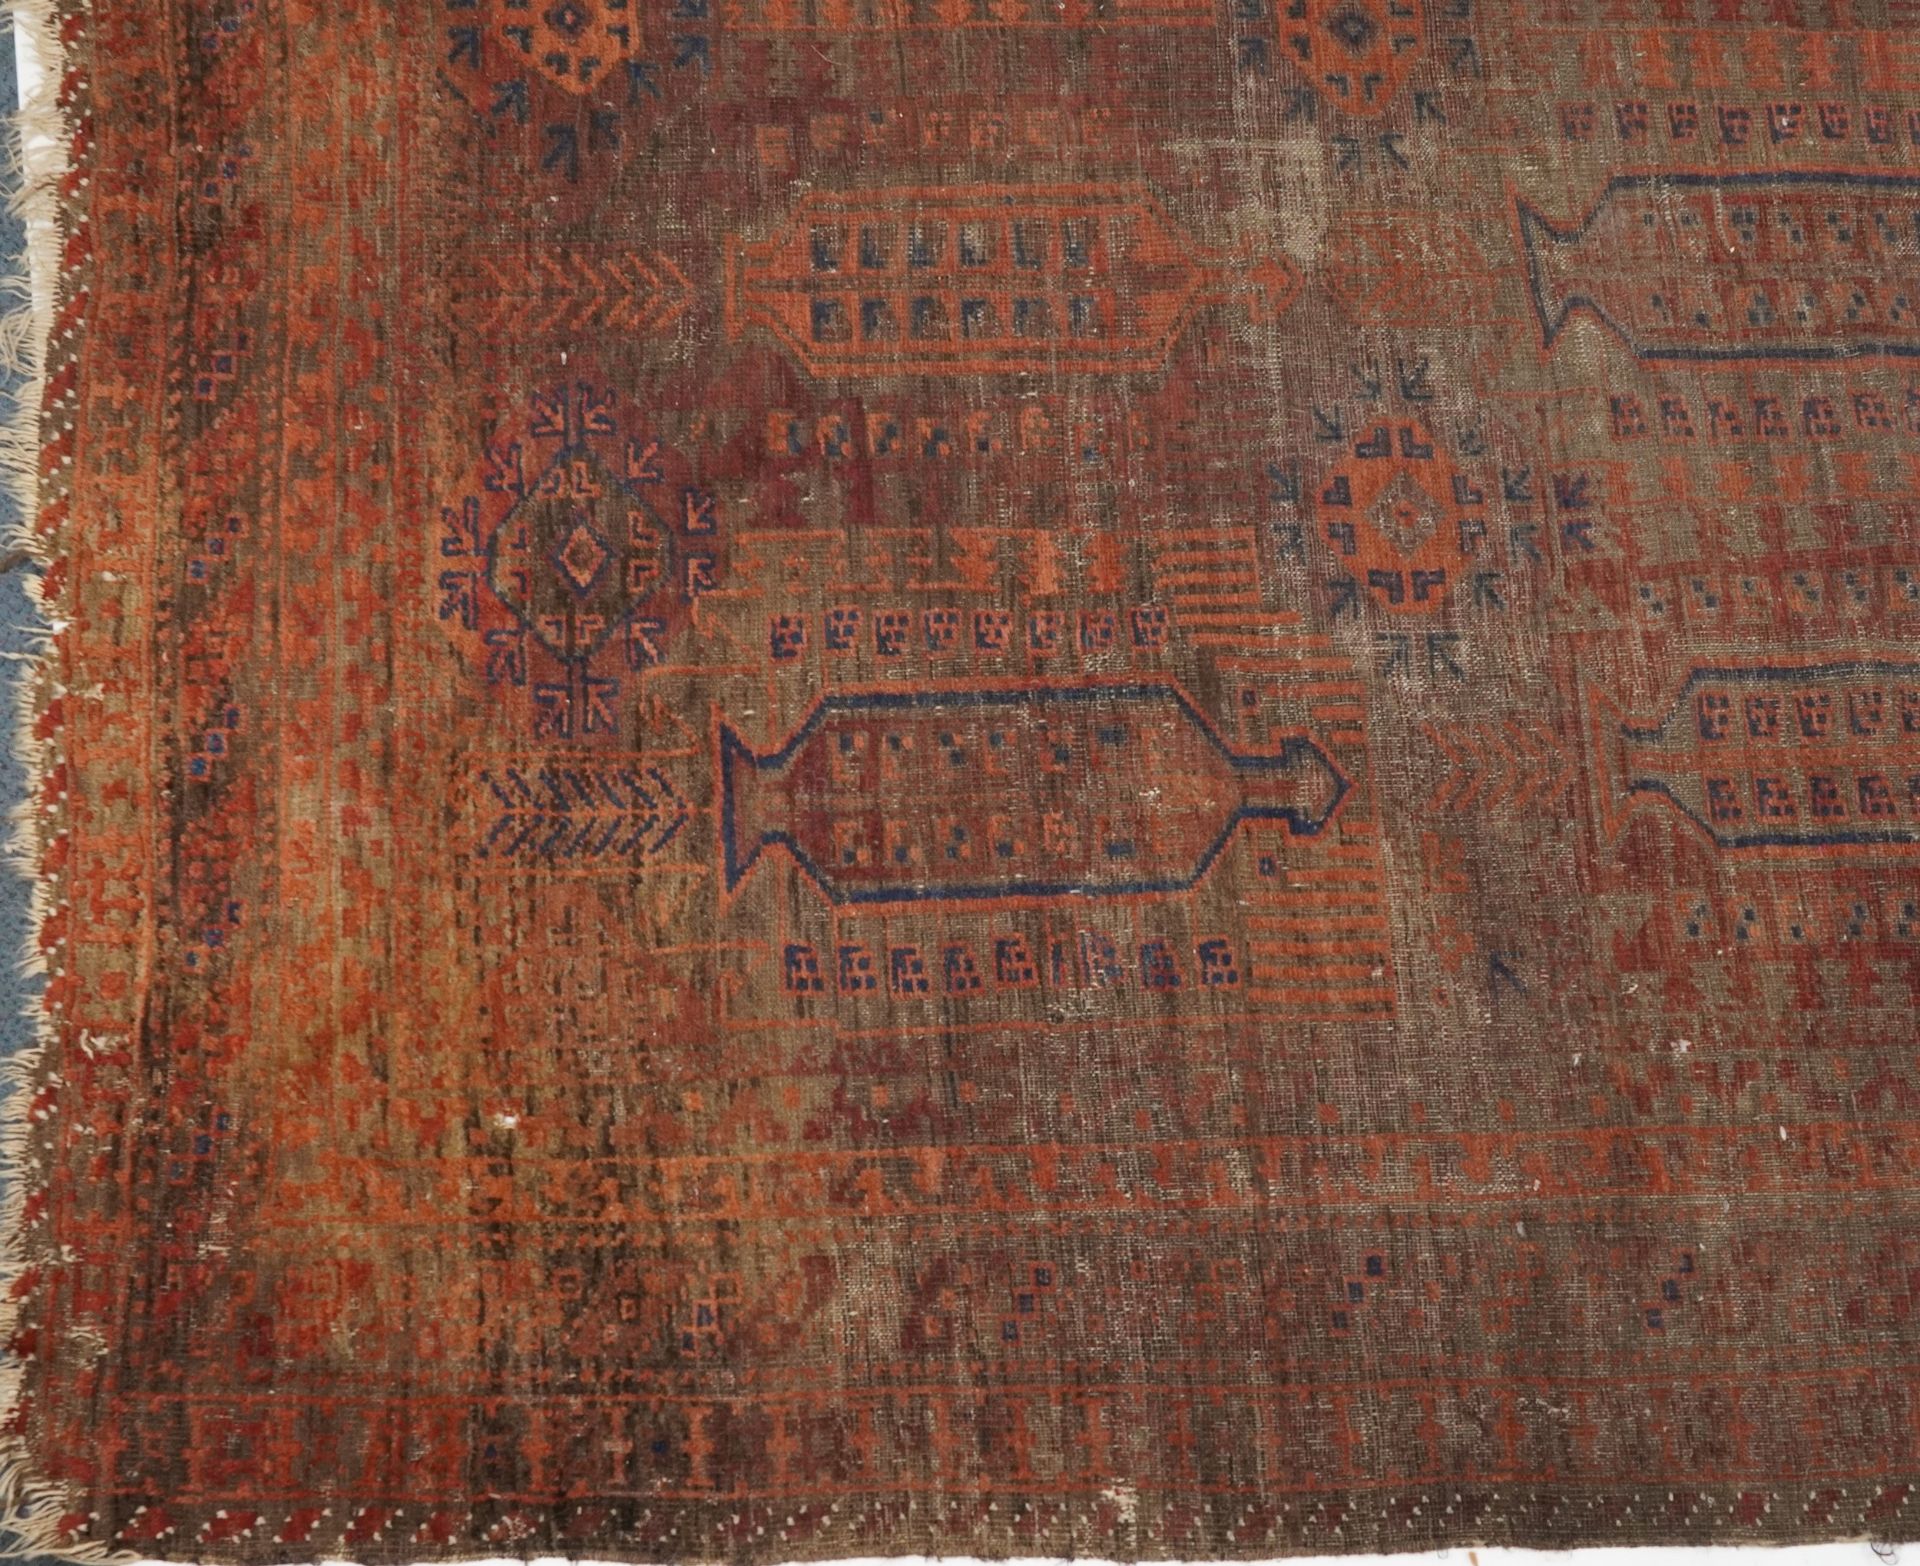 Antique Turkish carpet having an all over blue and red geometric design , 290cm x 206cm - Image 4 of 7